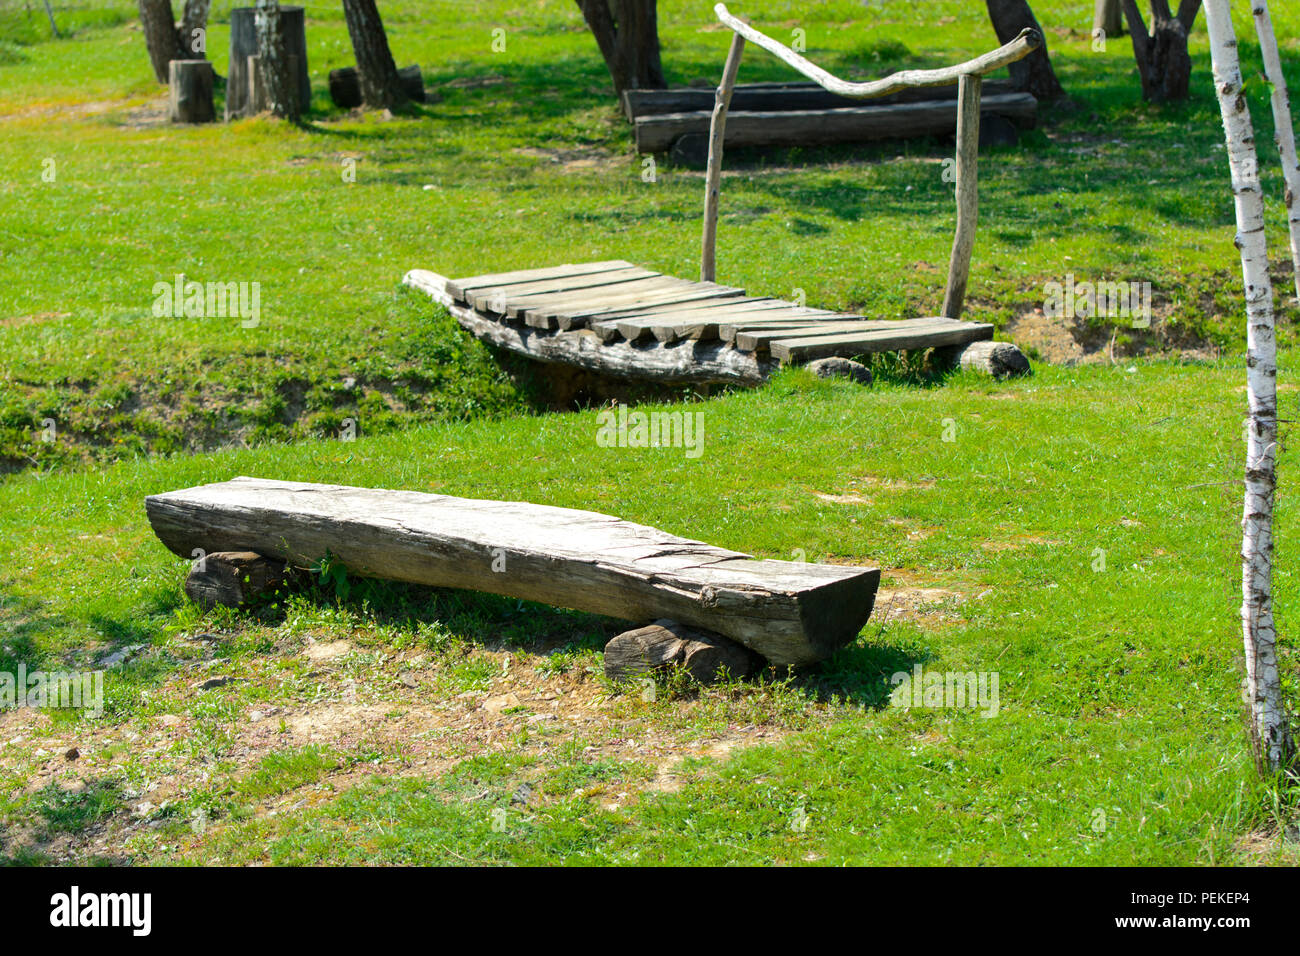 An old wooden bench rudely made from a log of wood against a background of green grass. Stock Photo